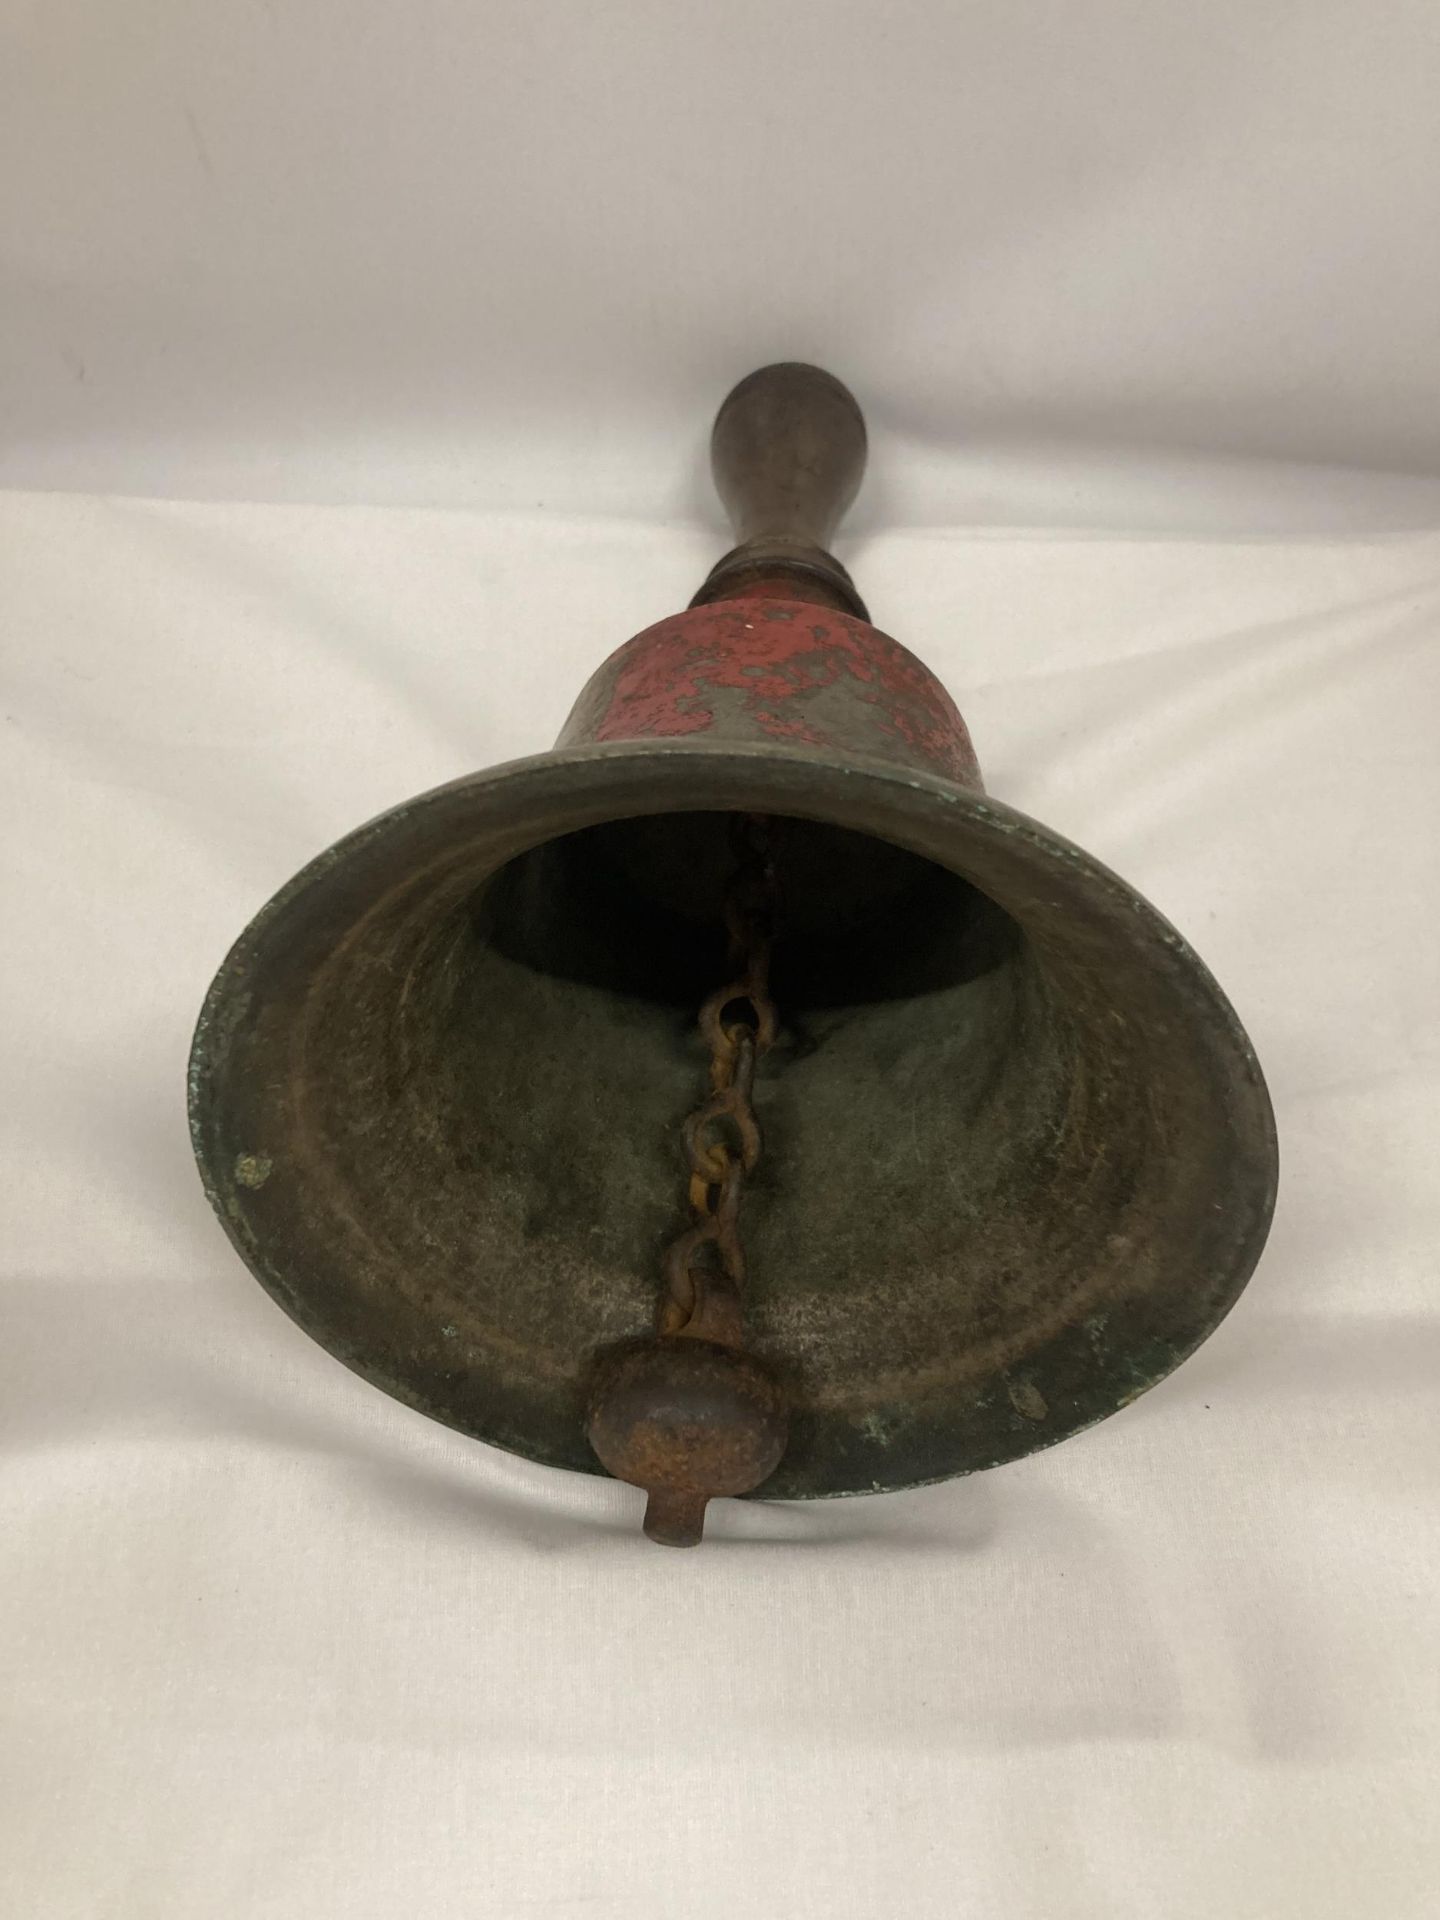 A LARGE VINTAGE METAL BELL WITH A WOODEN HANDLE - Image 3 of 3